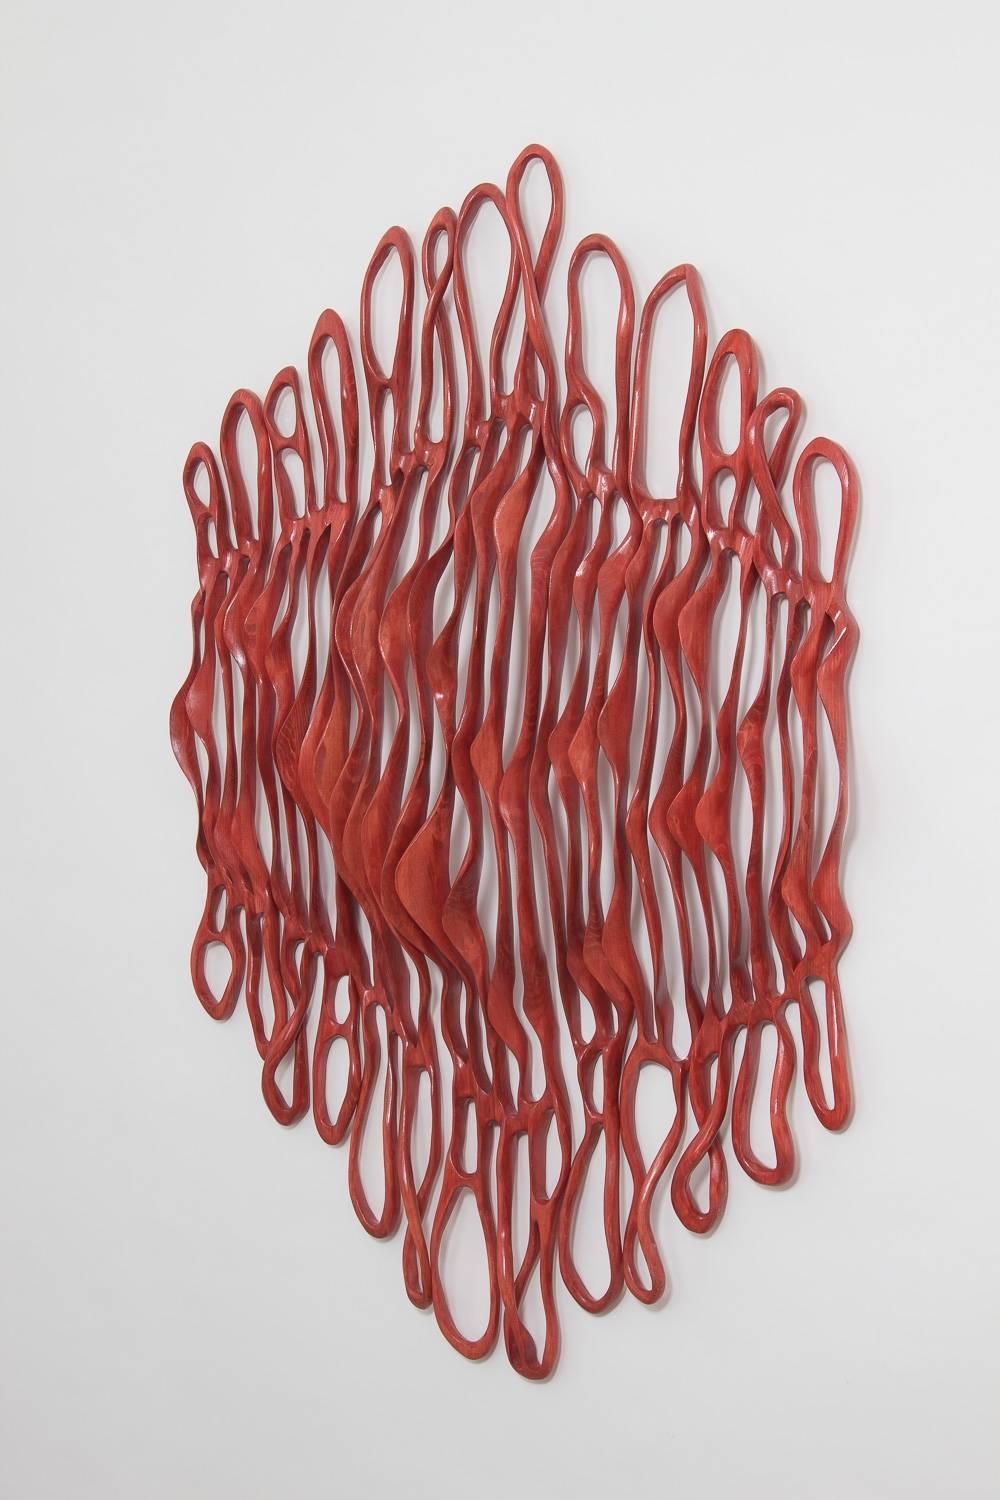 Red Dawn Cascade - Brown Abstract Sculpture by Caprice Pierucci